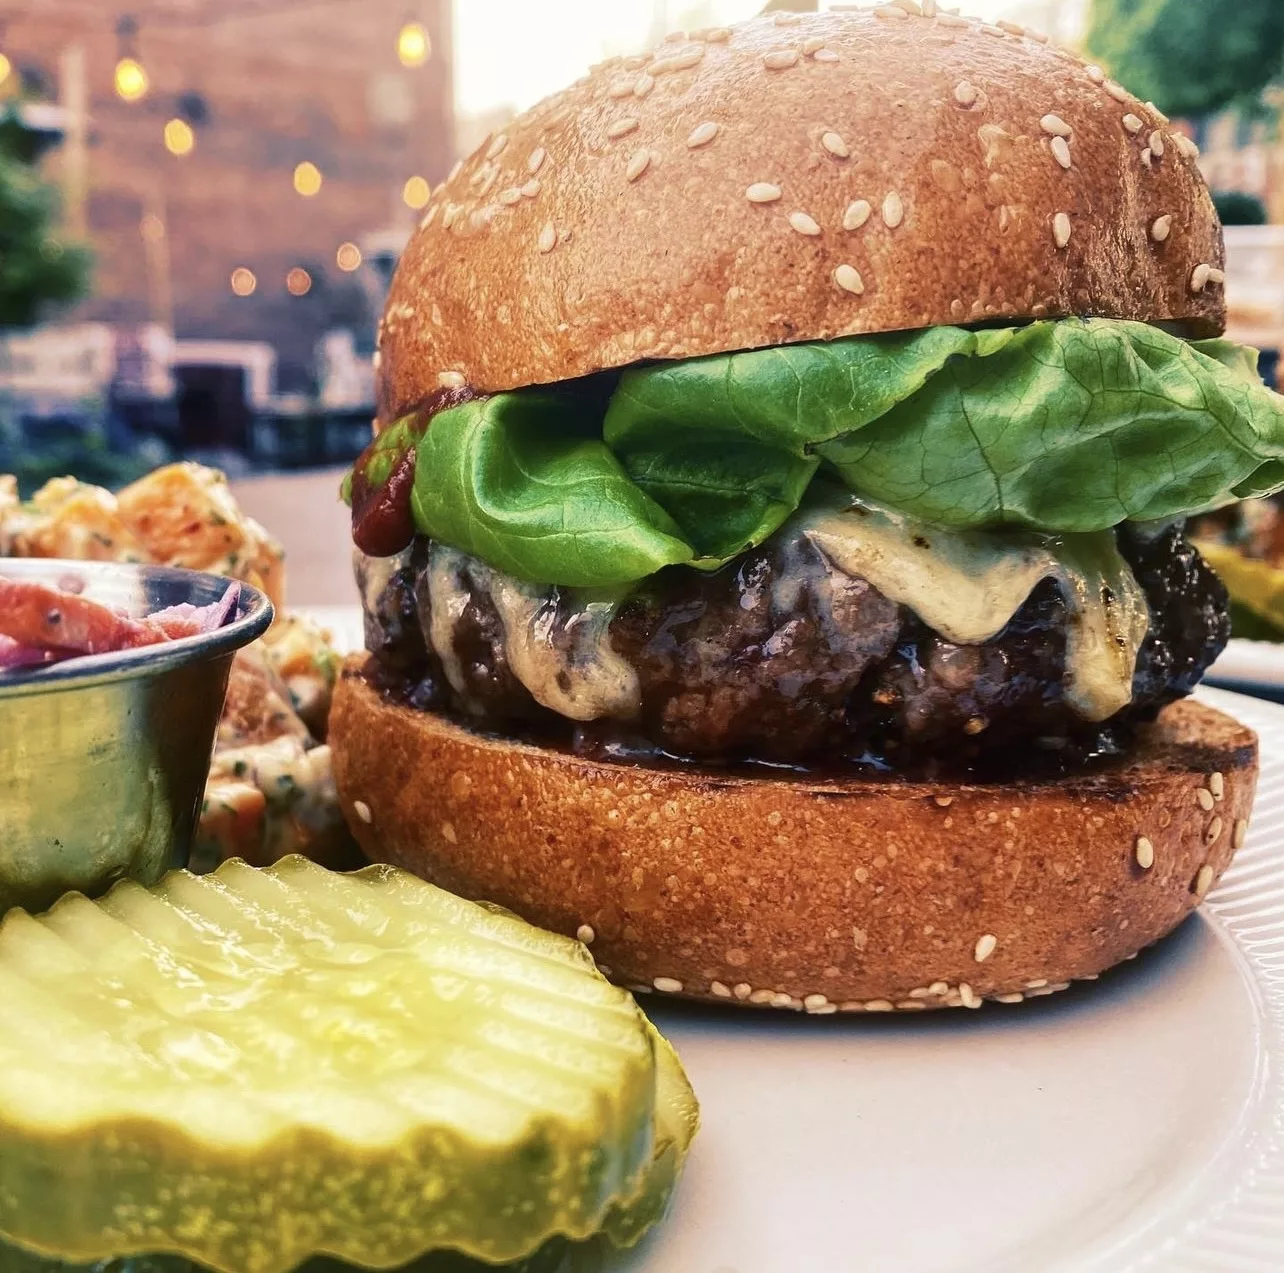 Boston's Best Burgers - Our Favorite Spots for the Perfect Patty